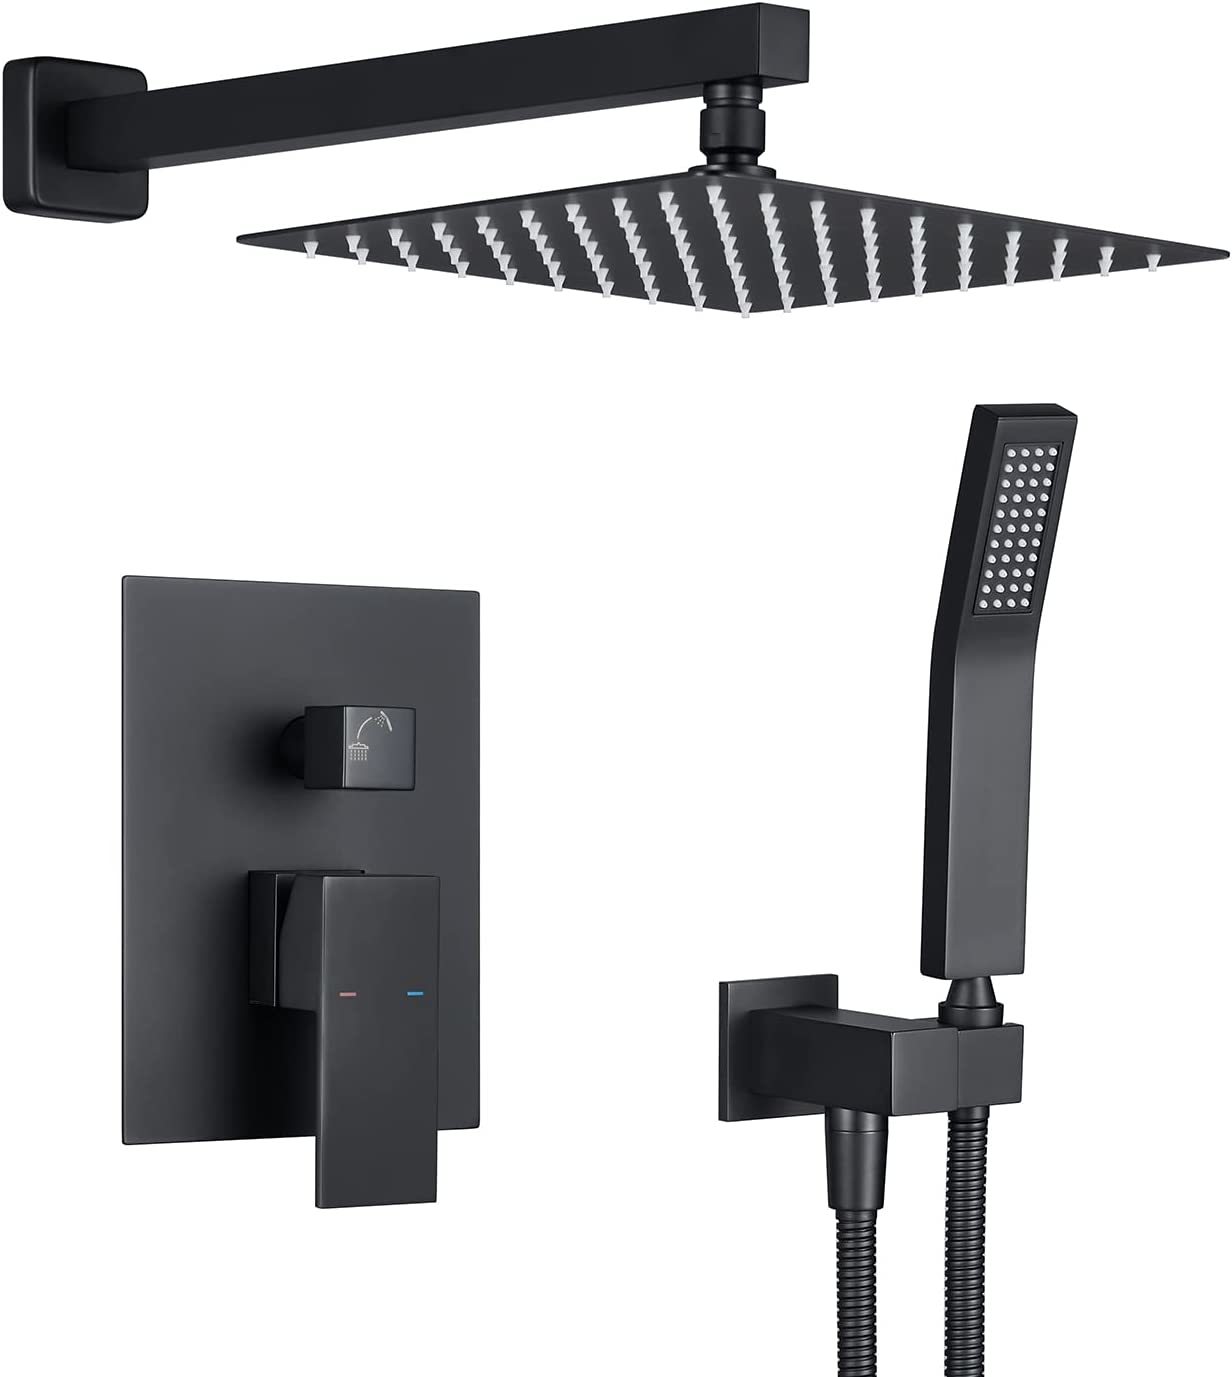 Primary image for 10 Inches Rain Shower Combo Set Black Wall Mount Faucet Bathroom Faucets With